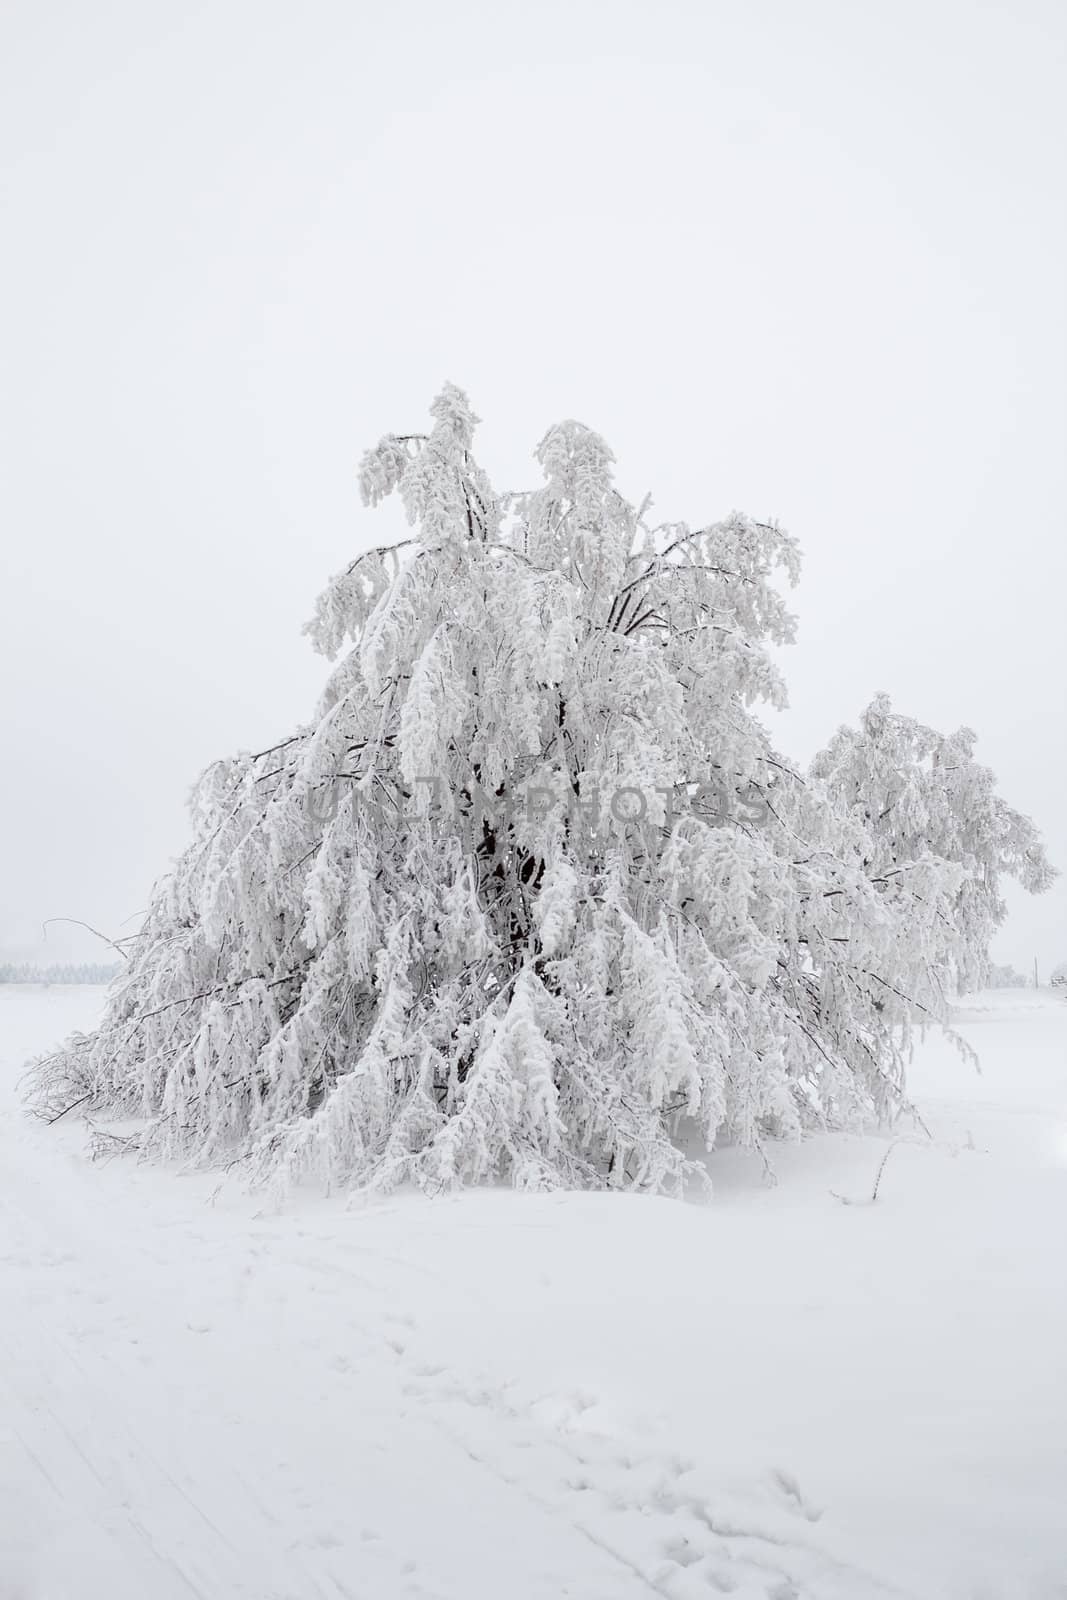 Nice winter landscape with tree